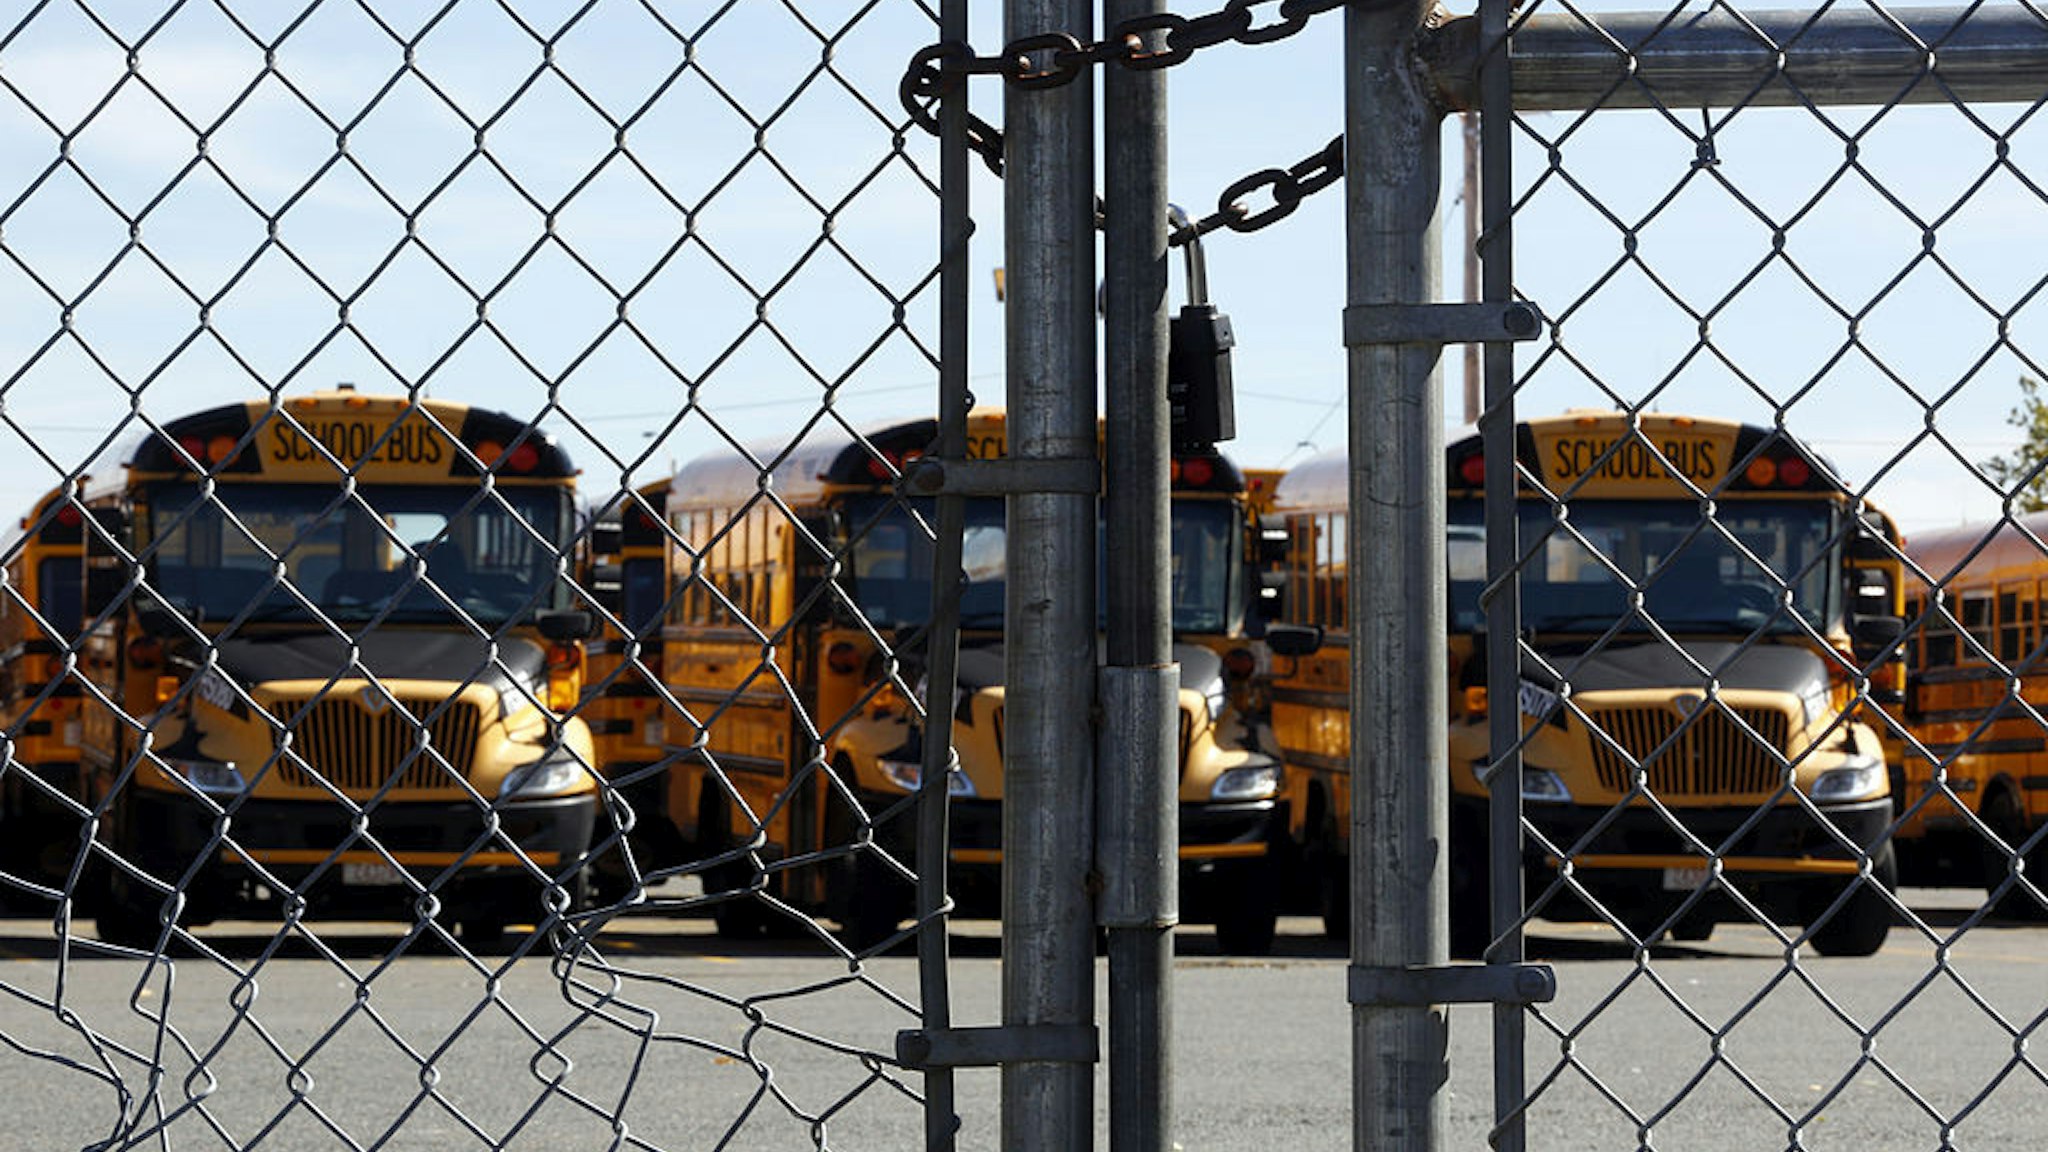 Buses are seen behind a padlocked gate after bus drivers were locked out of the yard in Dorchester, Mass., Oct. 8, 2013.